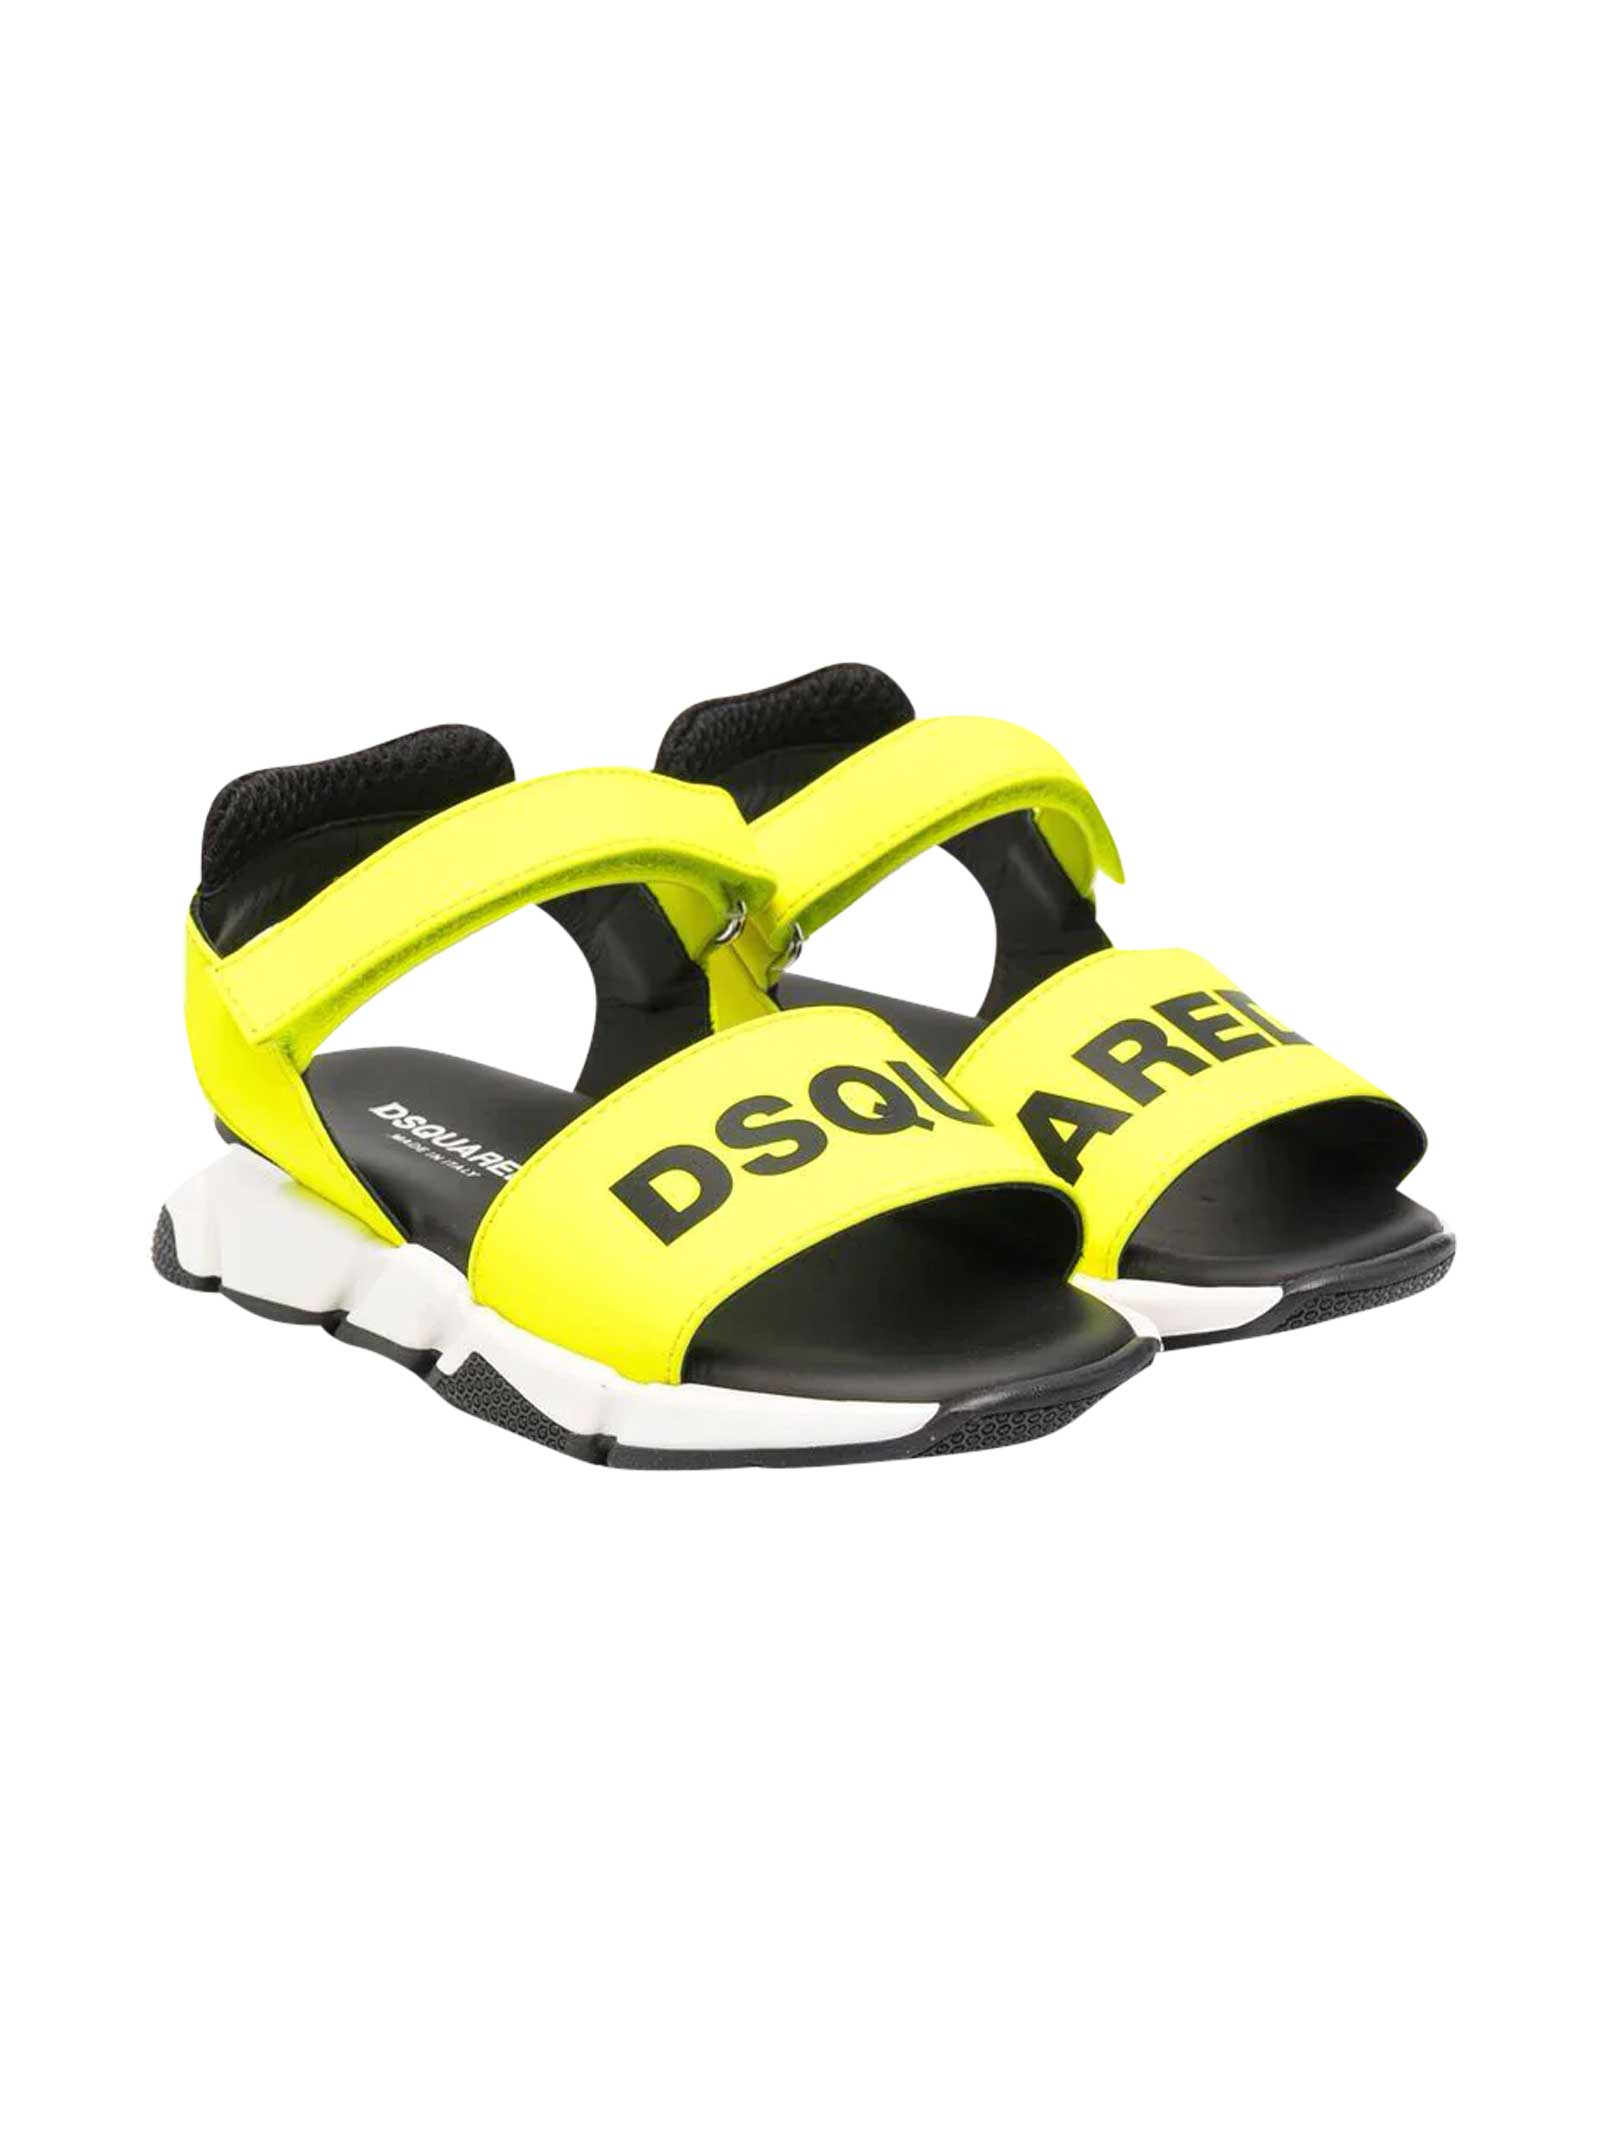 DSQUARED2 BLACK AND YELLOW SANDALS DSQUARED KIDS,66961 VAR9